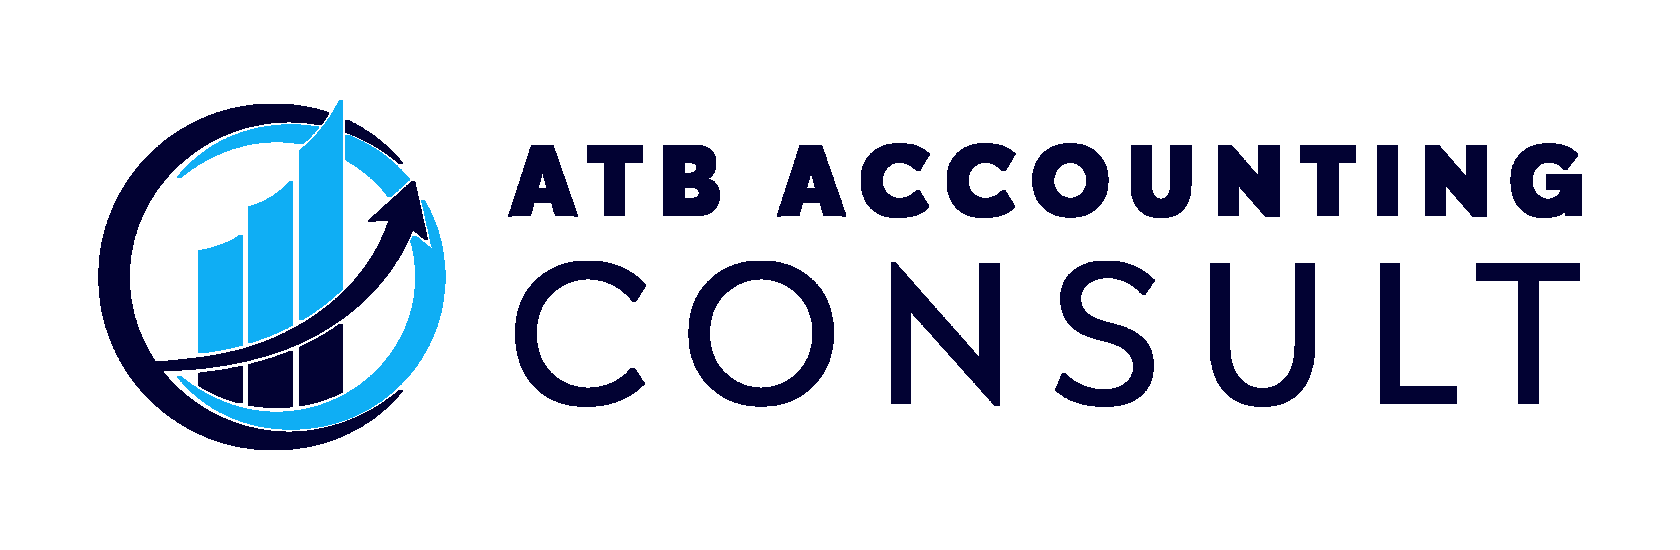 ATB Accounting Consult